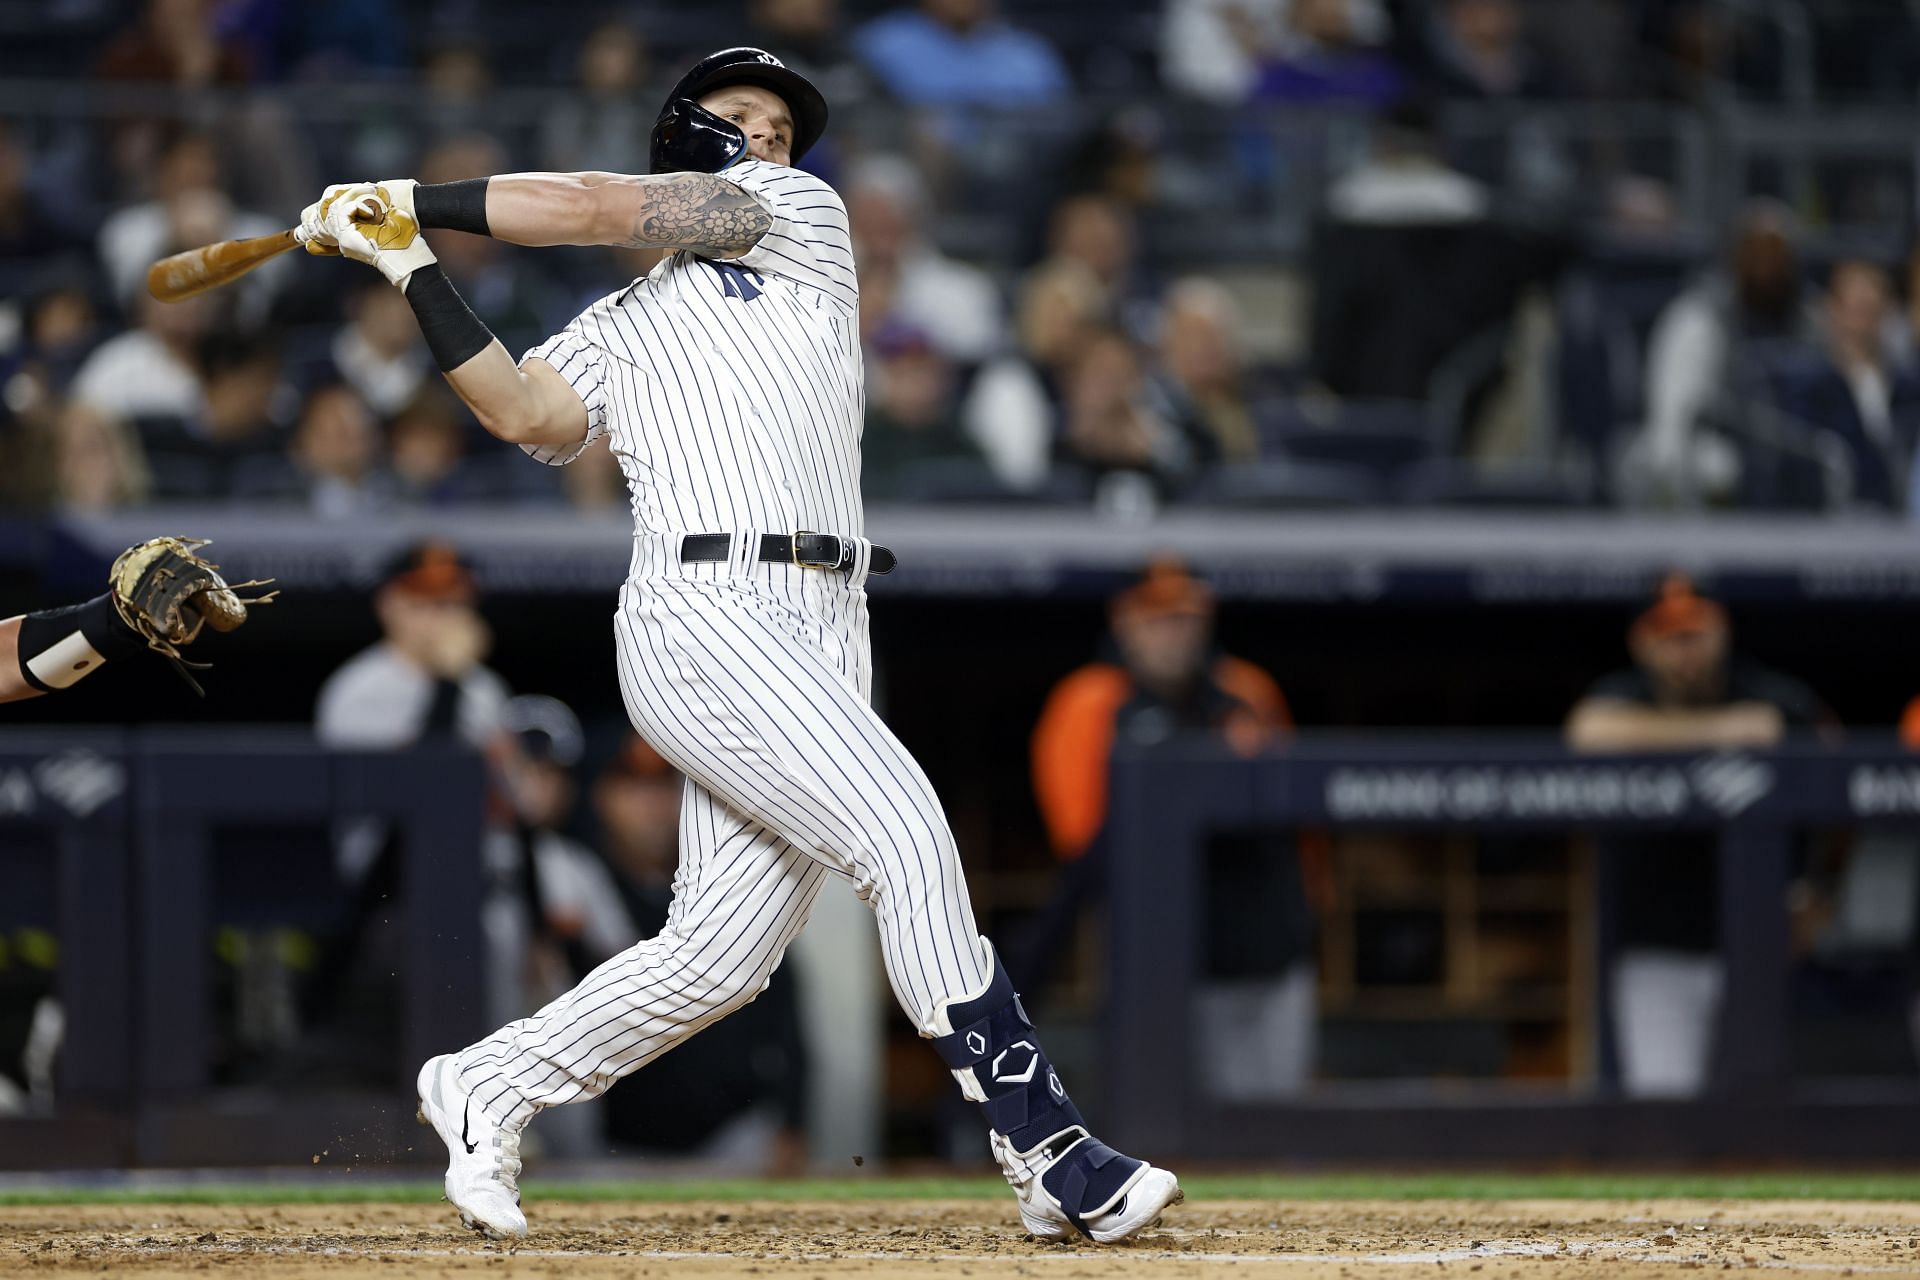 Jake Bauers of the New York Yankees swings at a pitch against the Baltimore Orioles at Yankee Stadium